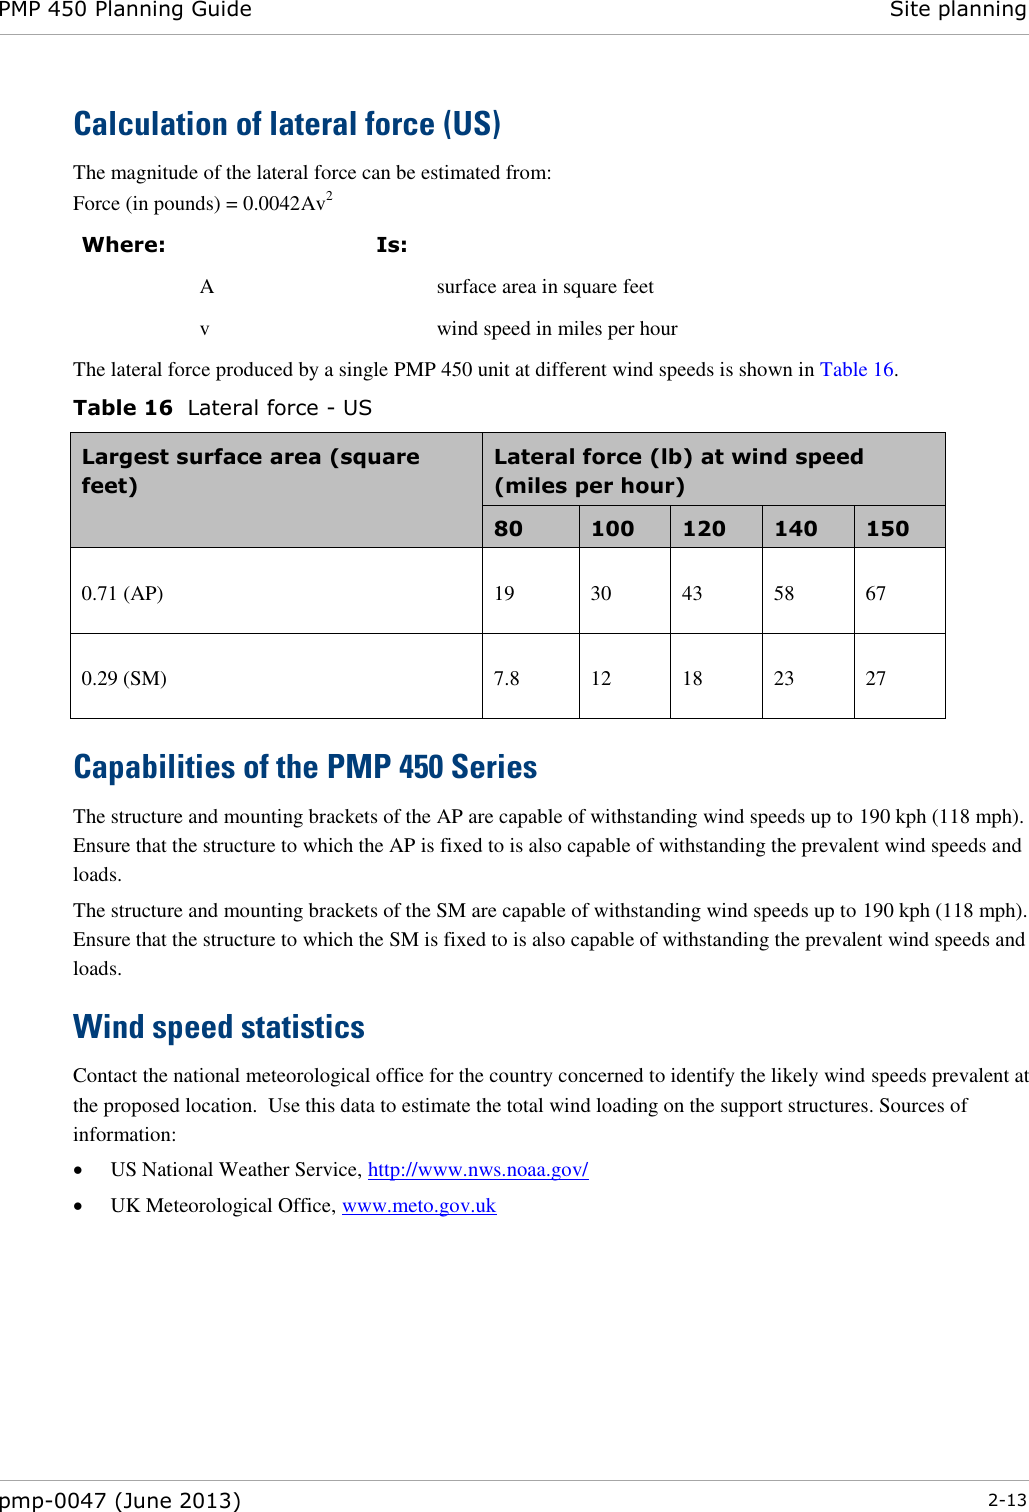 PMP 450 Planning Guide Site planning  pmp-0047 (June 2013)  2-13  Calculation of lateral force (US) The magnitude of the lateral force can be estimated from: Force (in pounds) = 0.0042Av2 Where:  Is:   A  surface area in square feet  v  wind speed in miles per hour The lateral force produced by a single PMP 450 unit at different wind speeds is shown in Table 16. Table 16  Lateral force - US Largest surface area (square feet) Lateral force (lb) at wind speed (miles per hour) 80 100 120 140 150 0.71 (AP) 19  30 43 58  67 0.29 (SM) 7.8 12 18 23 27  Capabilities of the PMP 450 Series The structure and mounting brackets of the AP are capable of withstanding wind speeds up to 190 kph (118 mph). Ensure that the structure to which the AP is fixed to is also capable of withstanding the prevalent wind speeds and loads.  The structure and mounting brackets of the SM are capable of withstanding wind speeds up to 190 kph (118 mph). Ensure that the structure to which the SM is fixed to is also capable of withstanding the prevalent wind speeds and loads.  Wind speed statistics Contact the national meteorological office for the country concerned to identify the likely wind speeds prevalent at the proposed location.  Use this data to estimate the total wind loading on the support structures. Sources of information:  US National Weather Service, http://www.nws.noaa.gov/  UK Meteorological Office, www.meto.gov.uk 